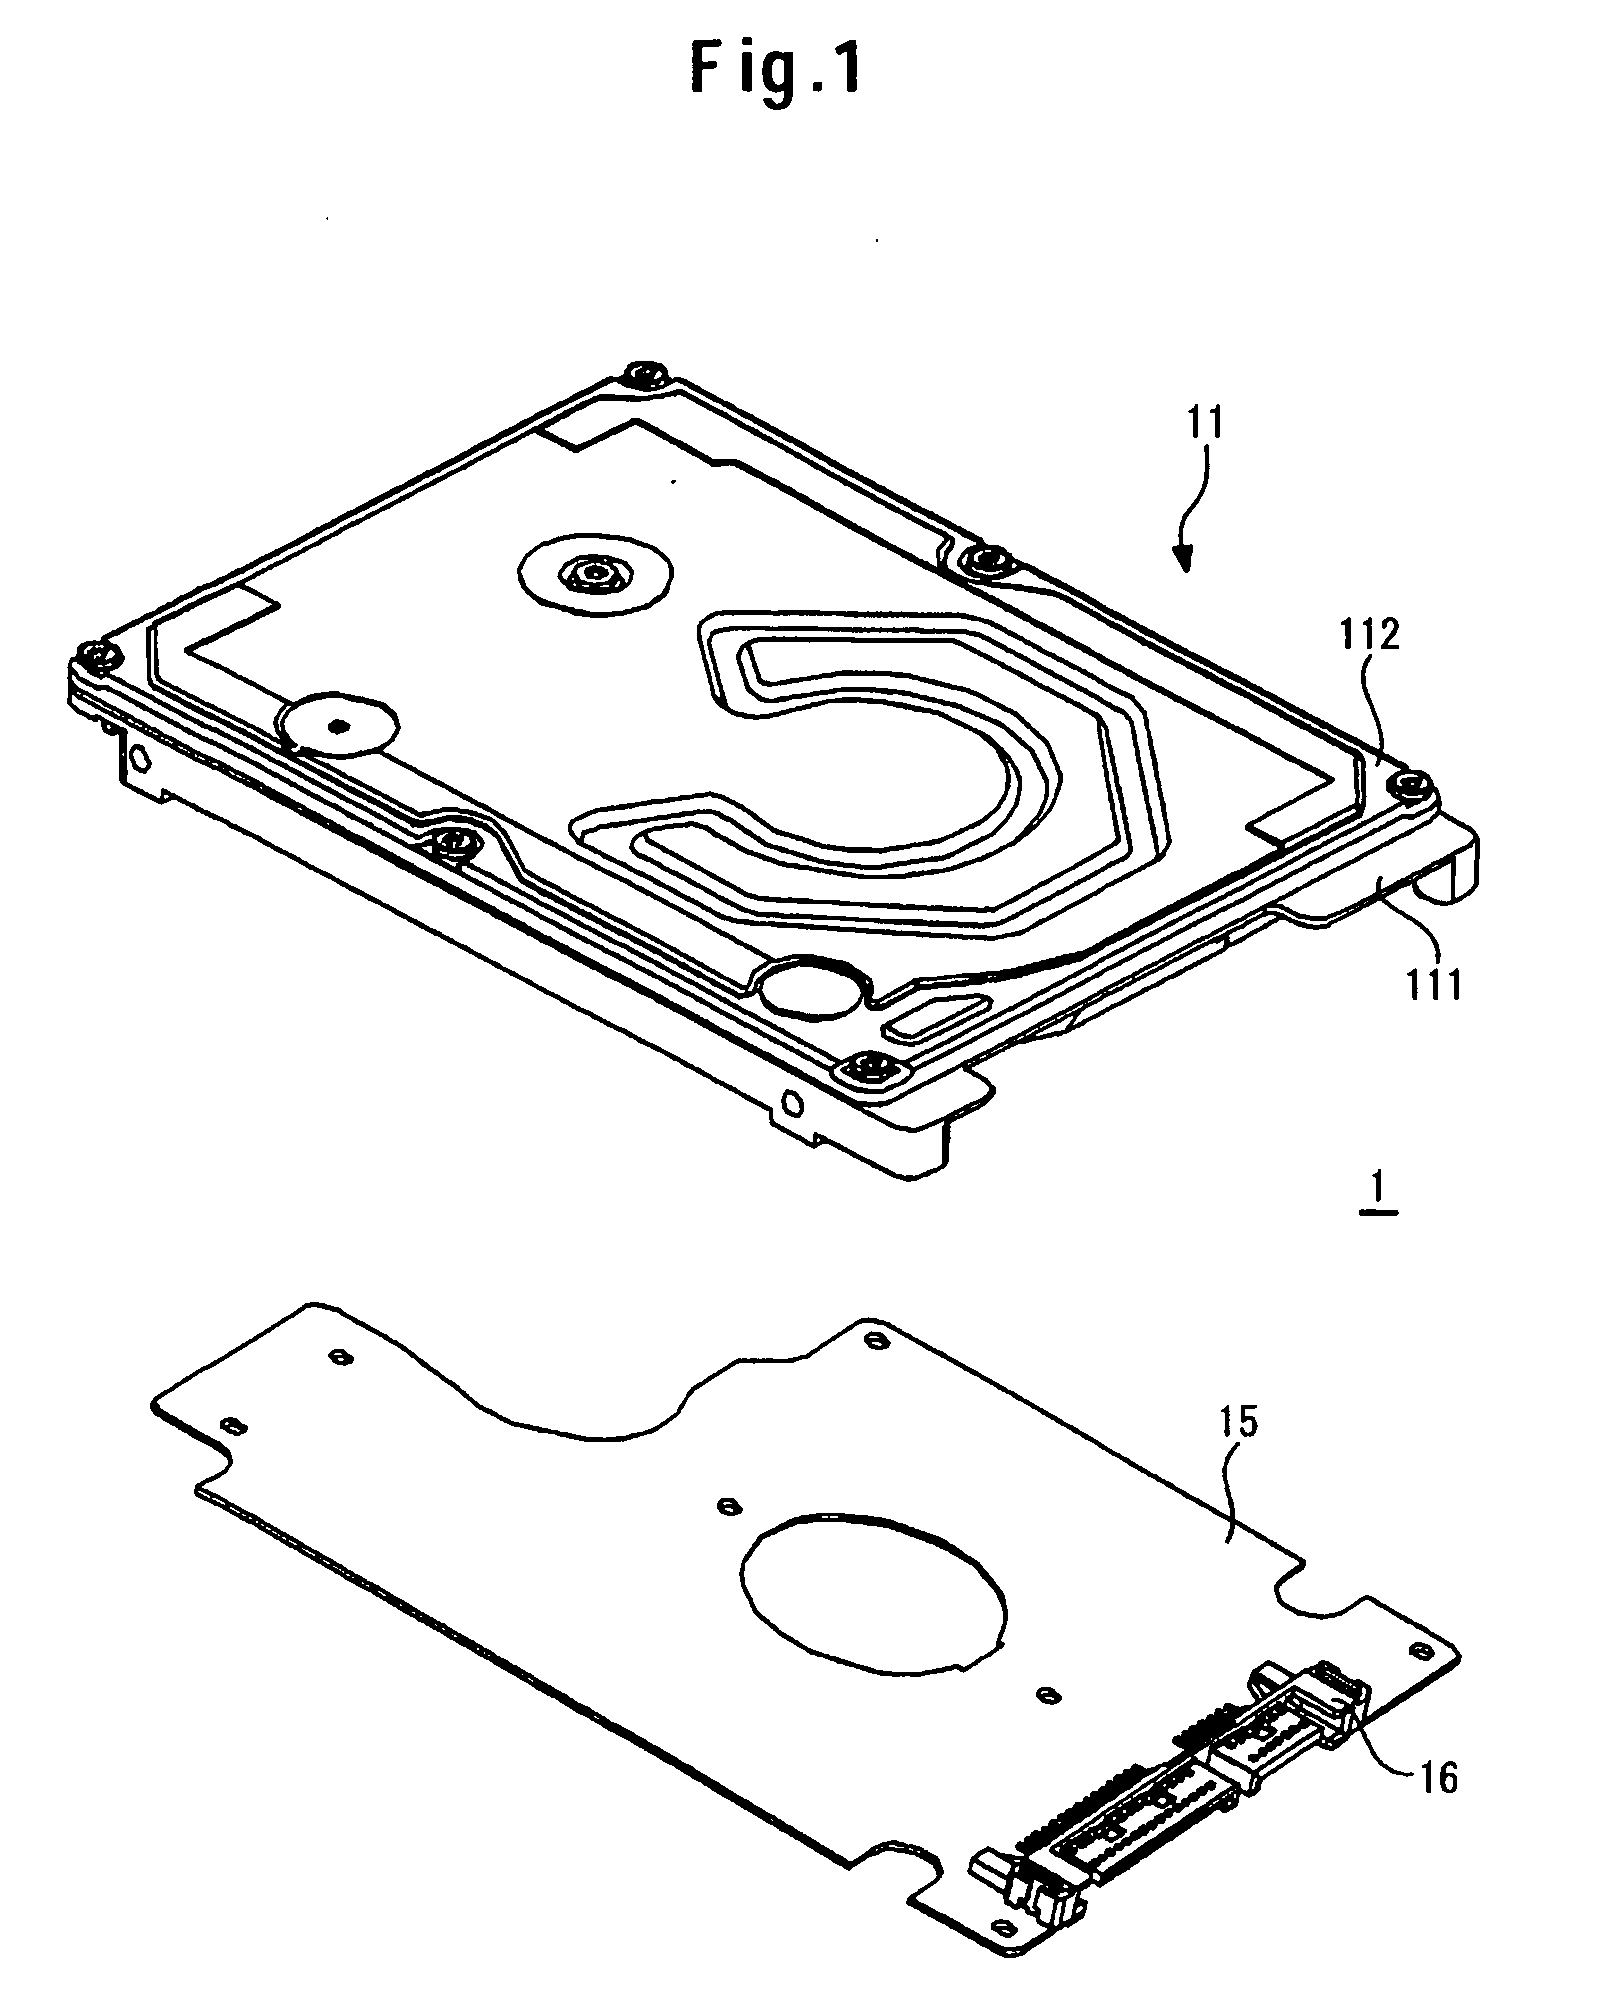 SATA connector protection mechanism